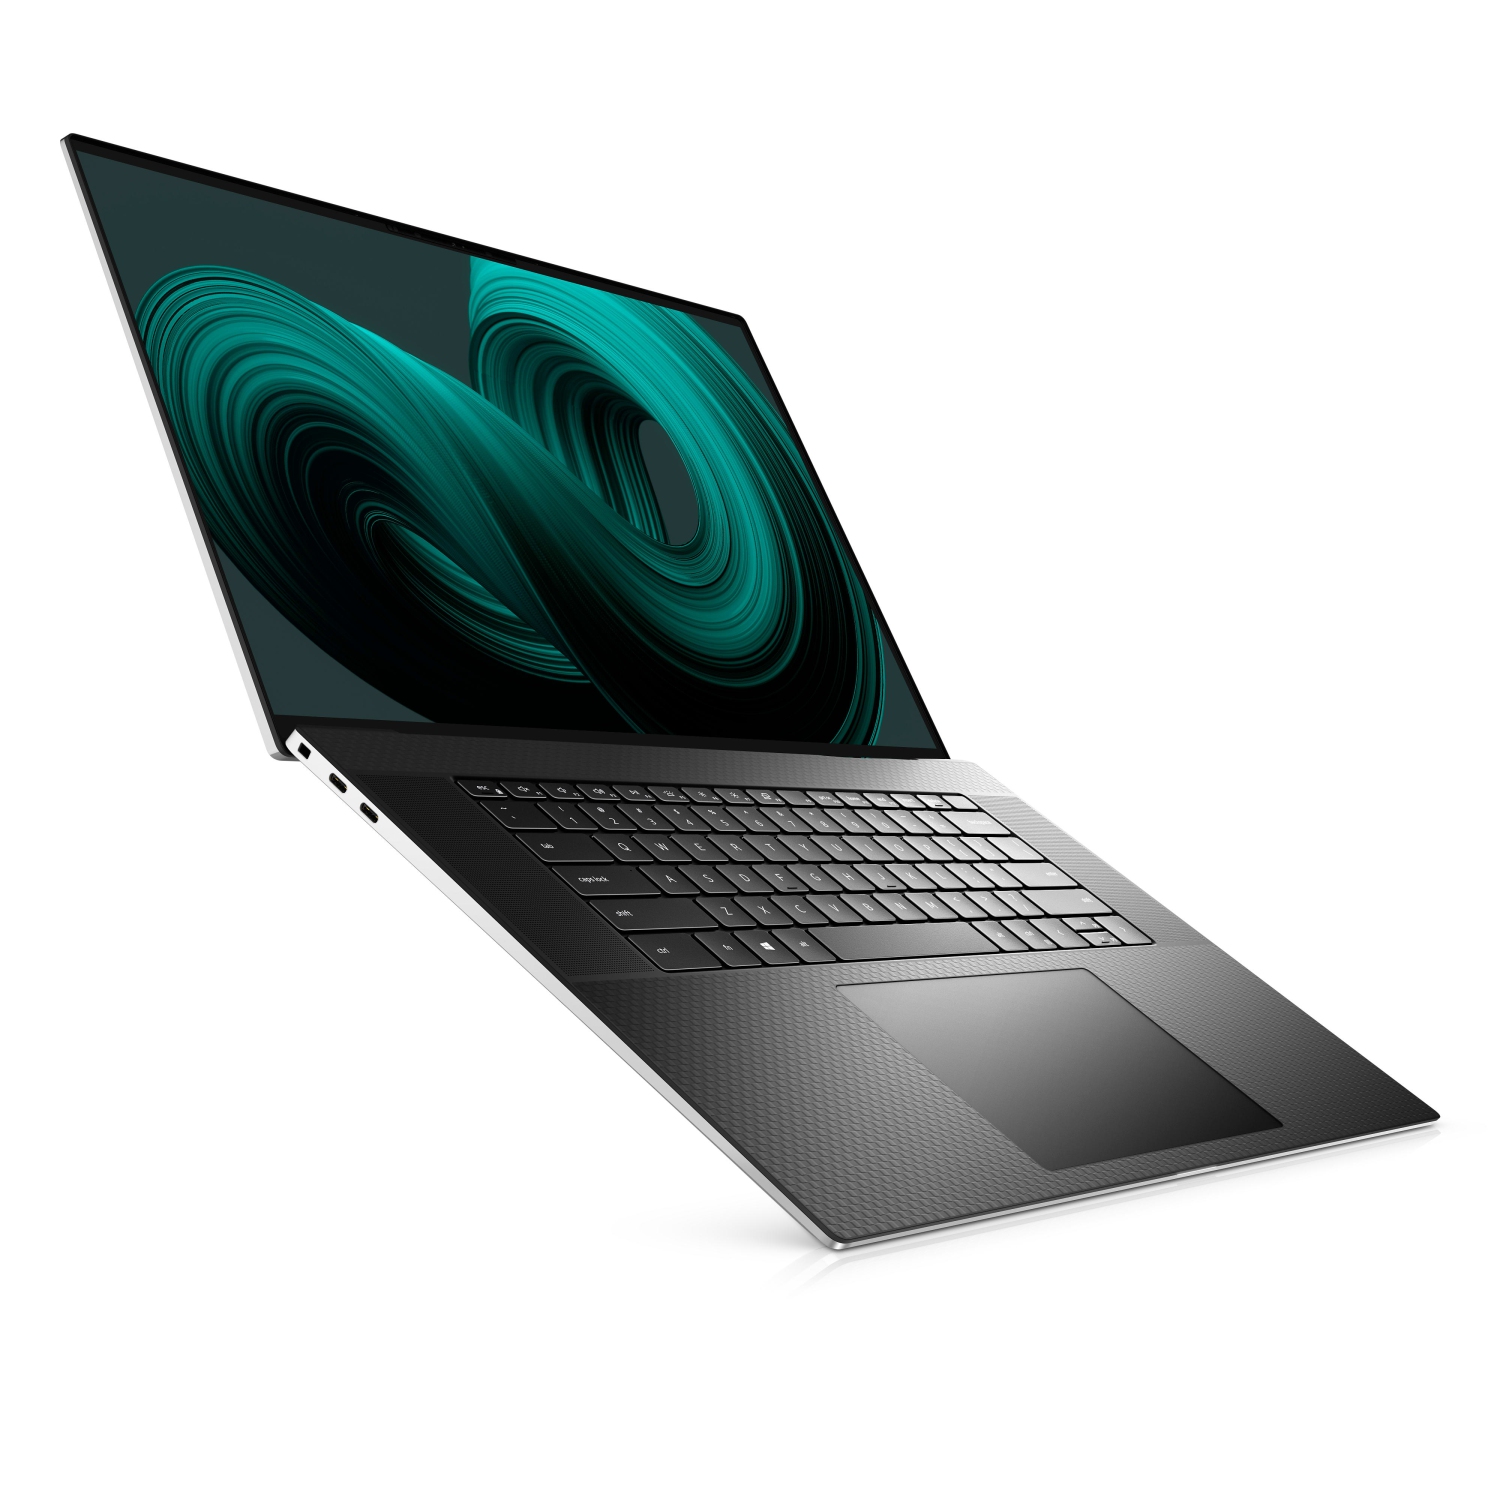 Refurbished (Excellent) - Dell XPS 17 9710 Laptop (2021) | 17" 4K Touch | Core i9 - 1TB SSD - 32GB RAM - RTX 3060 | 8 Cores @ 5 GHz - 11th Gen CPU Certified Refurbished